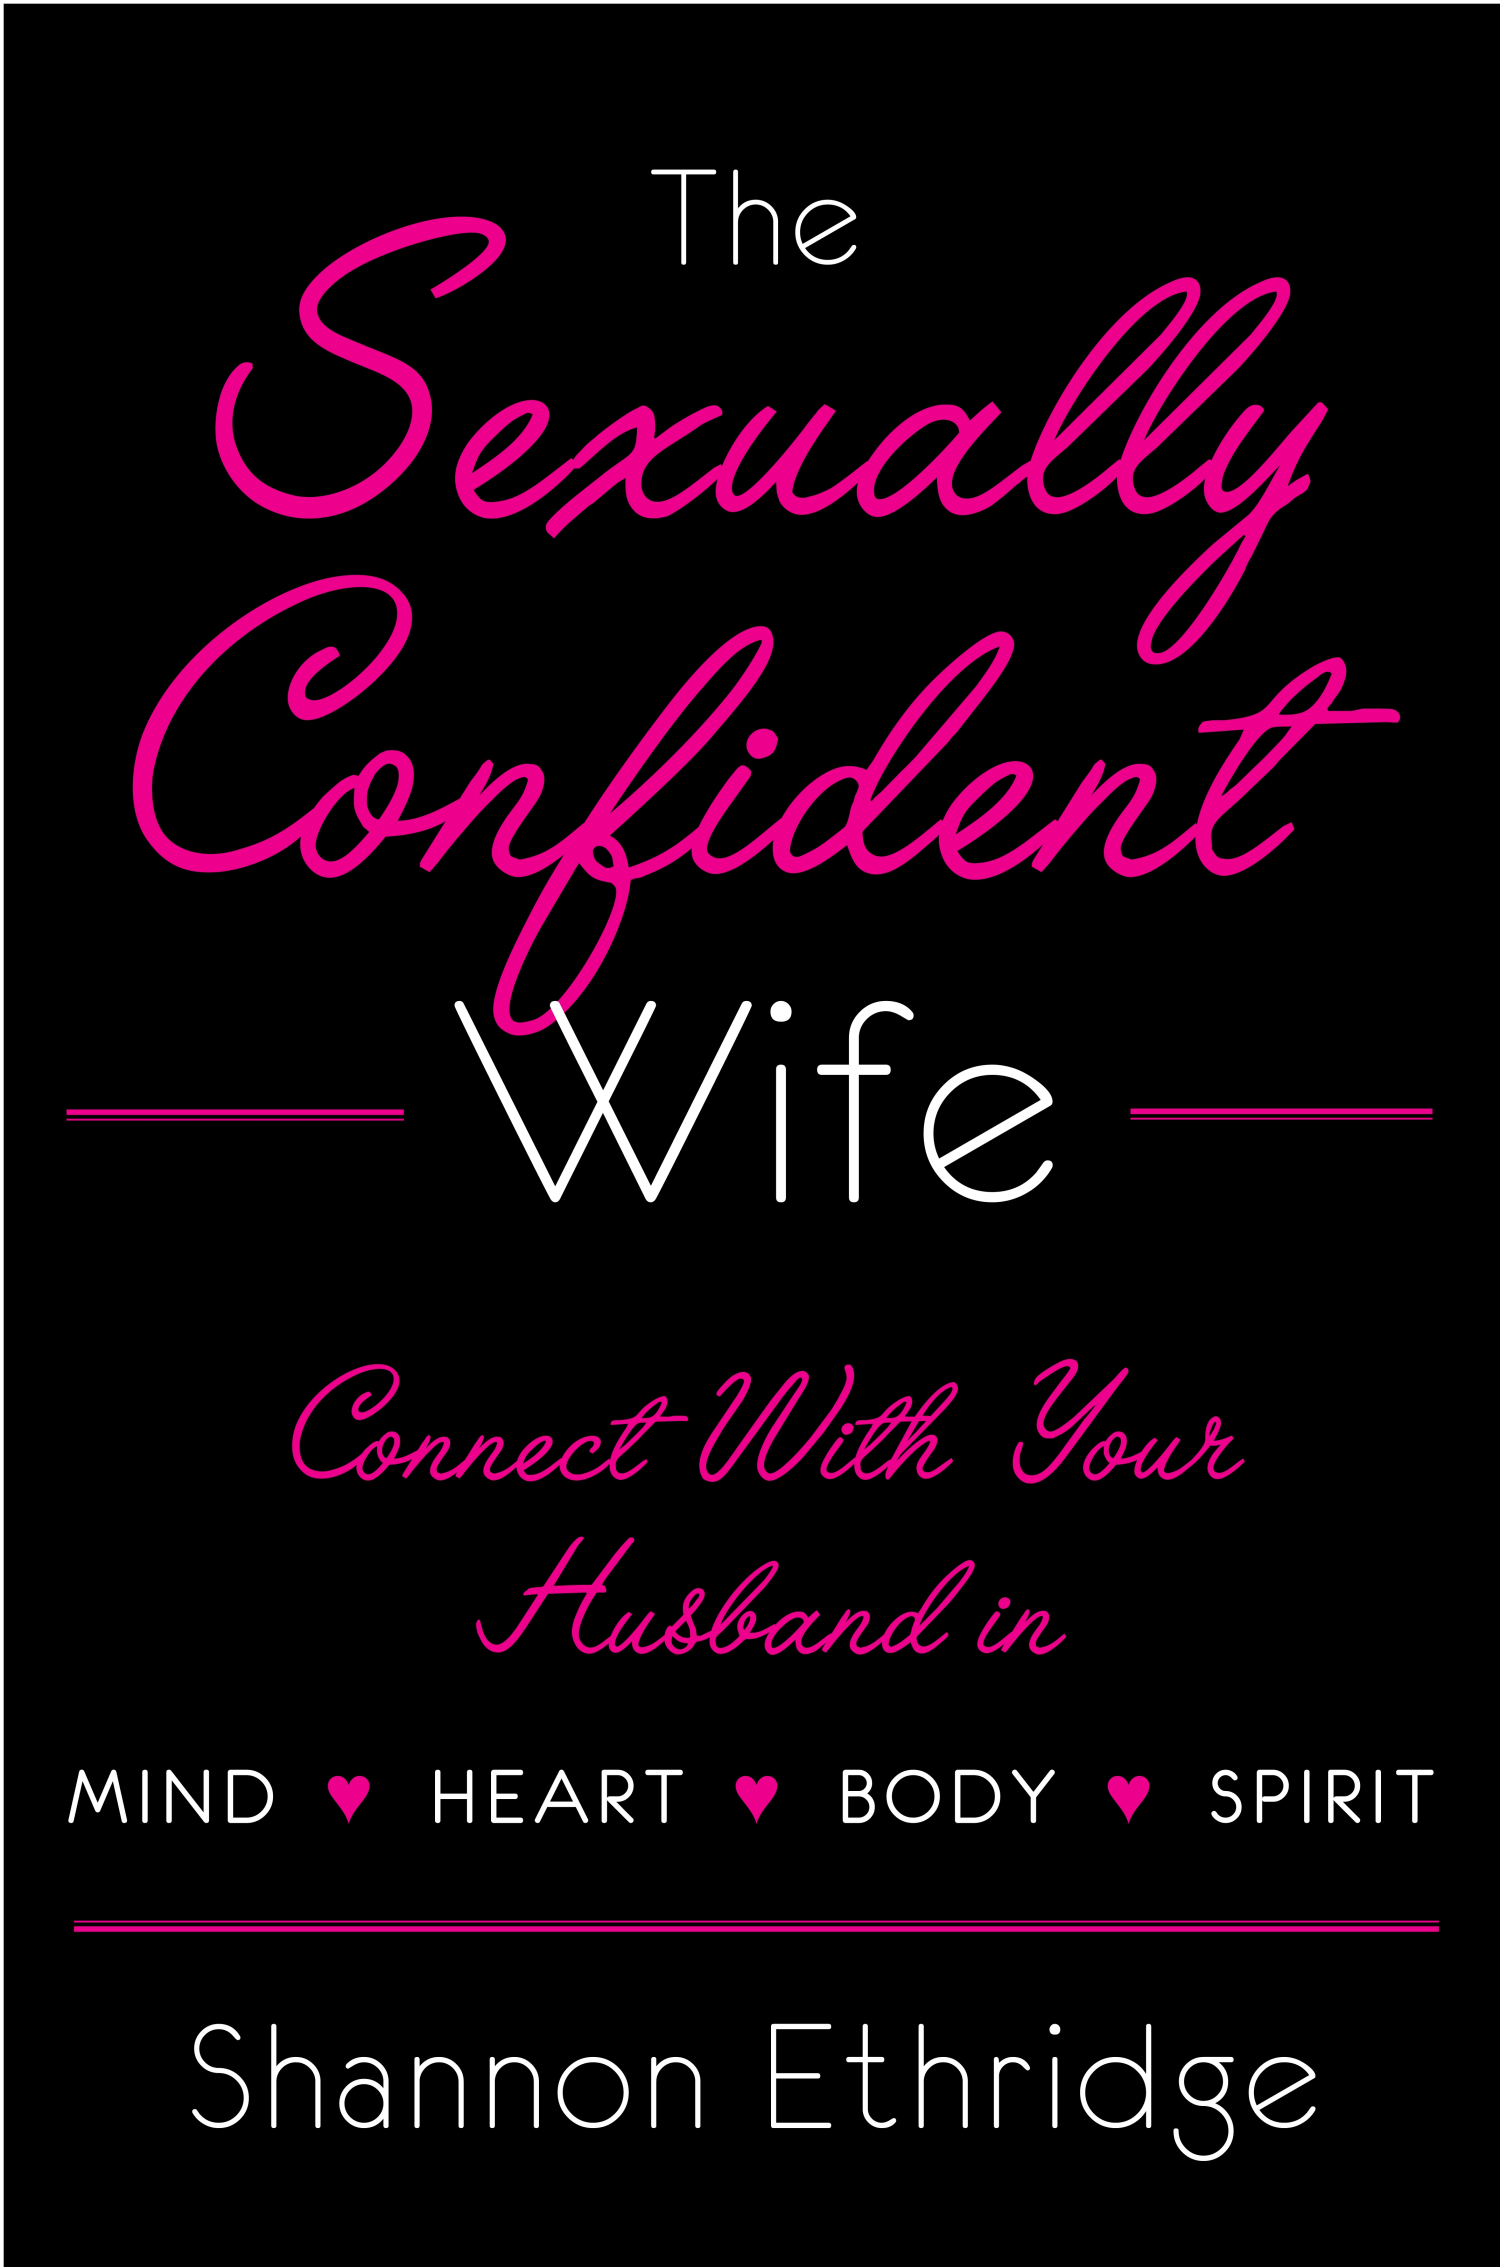 How to restore your sexual confidence picture